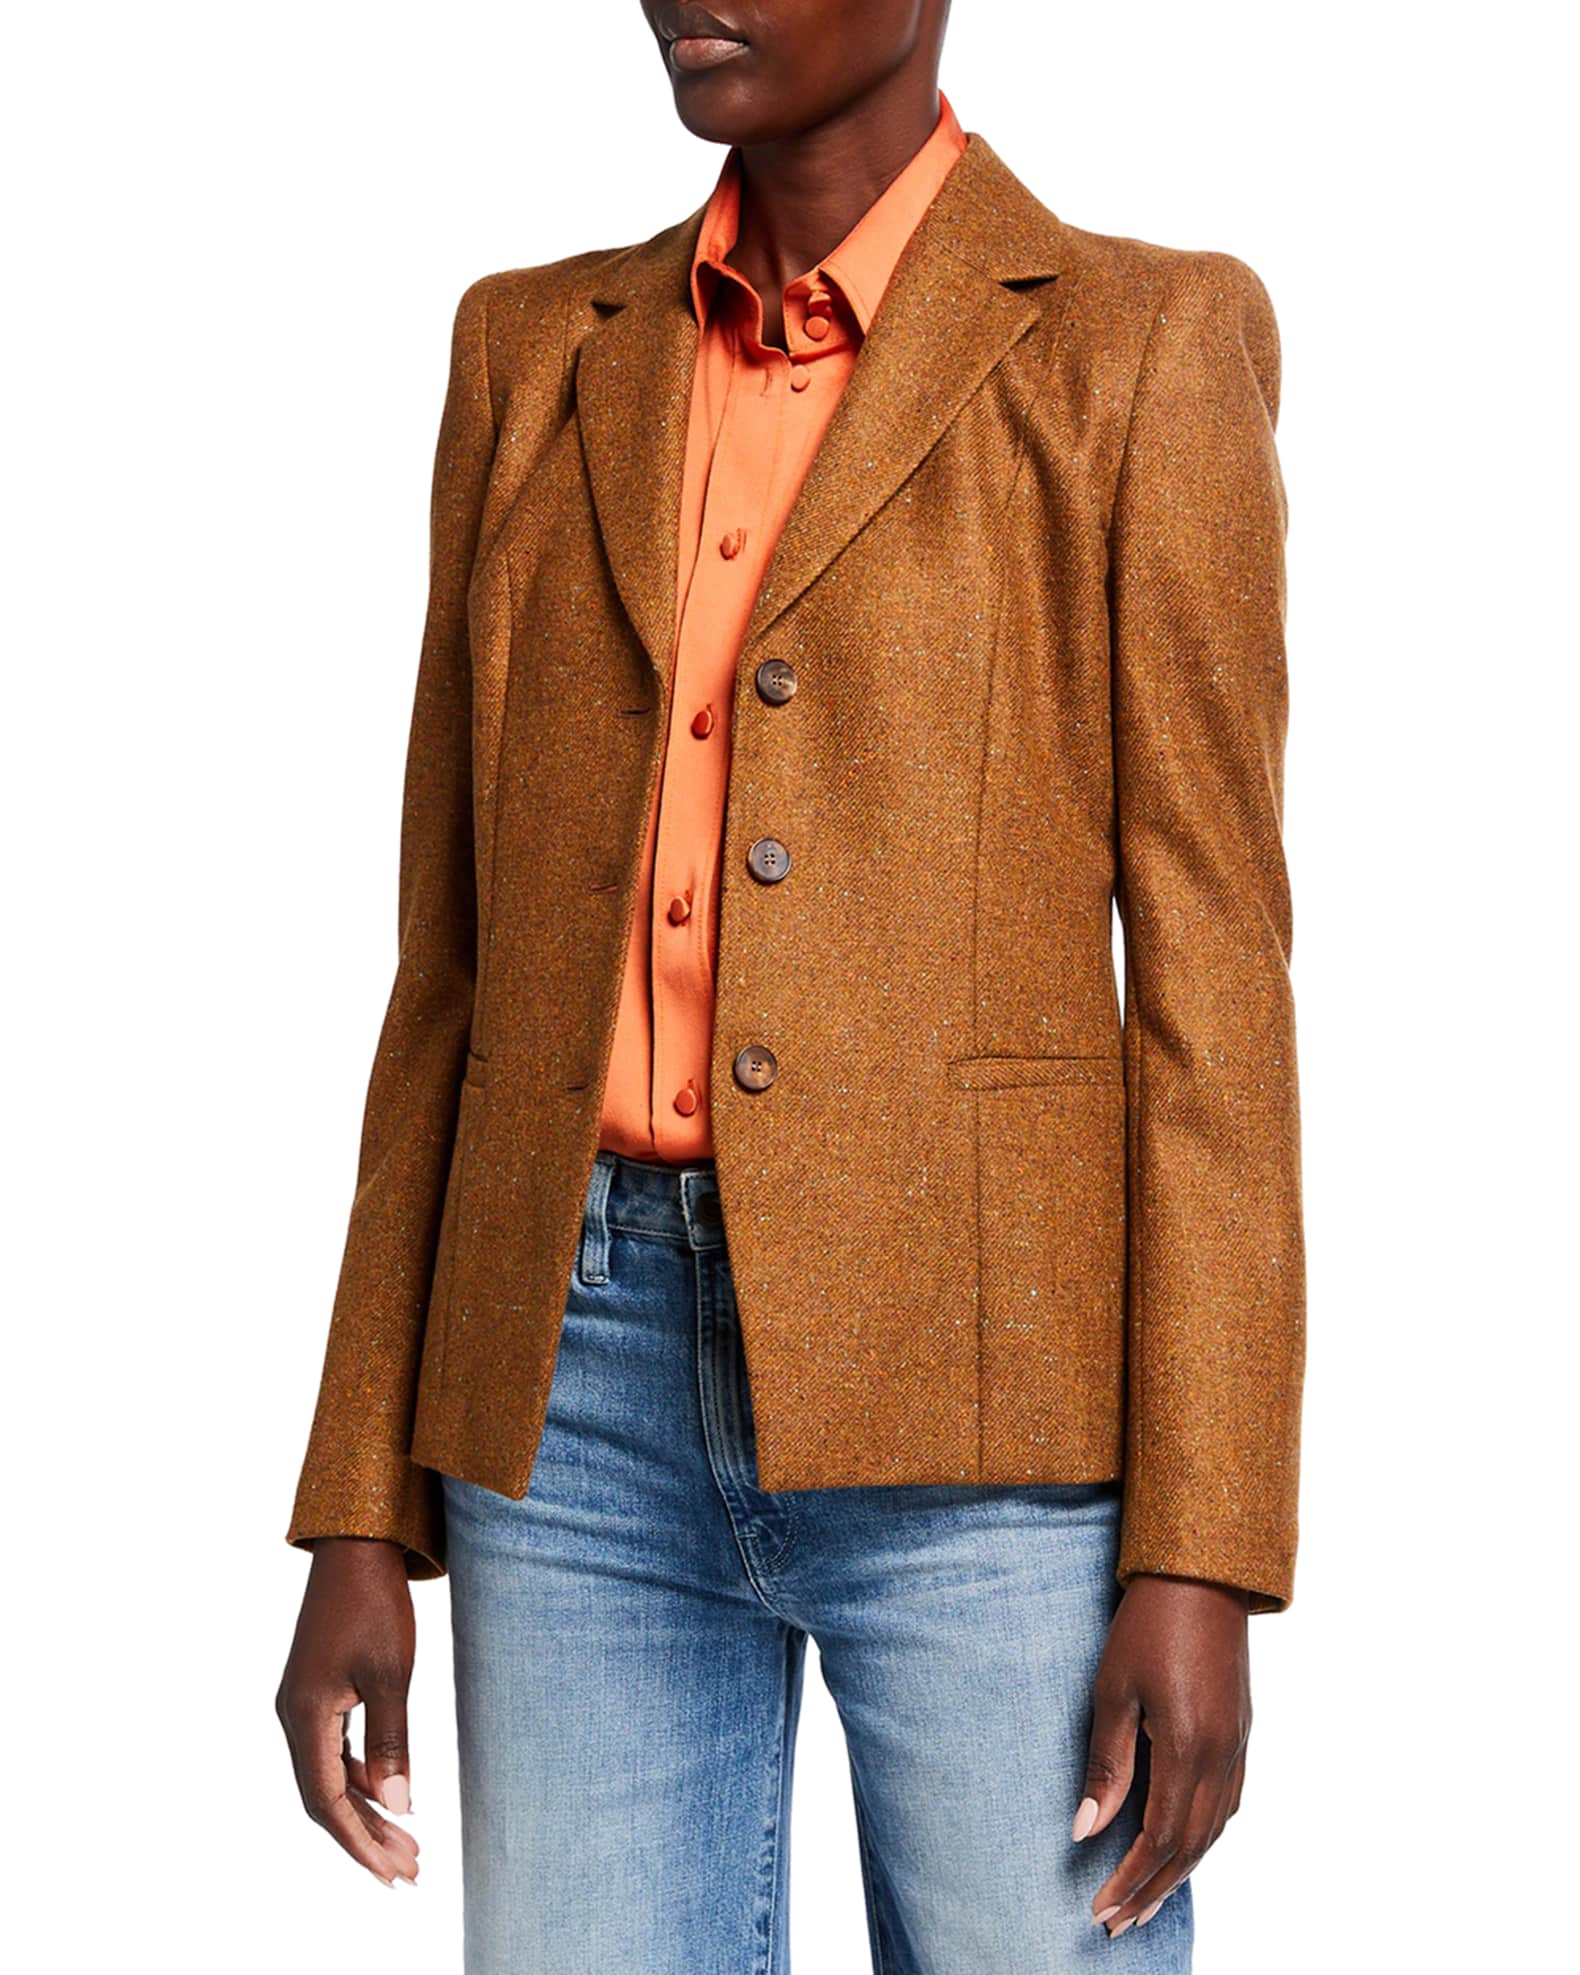 West Speckled Italian Cashmere Blazer and Matching Items | Neiman Marcus